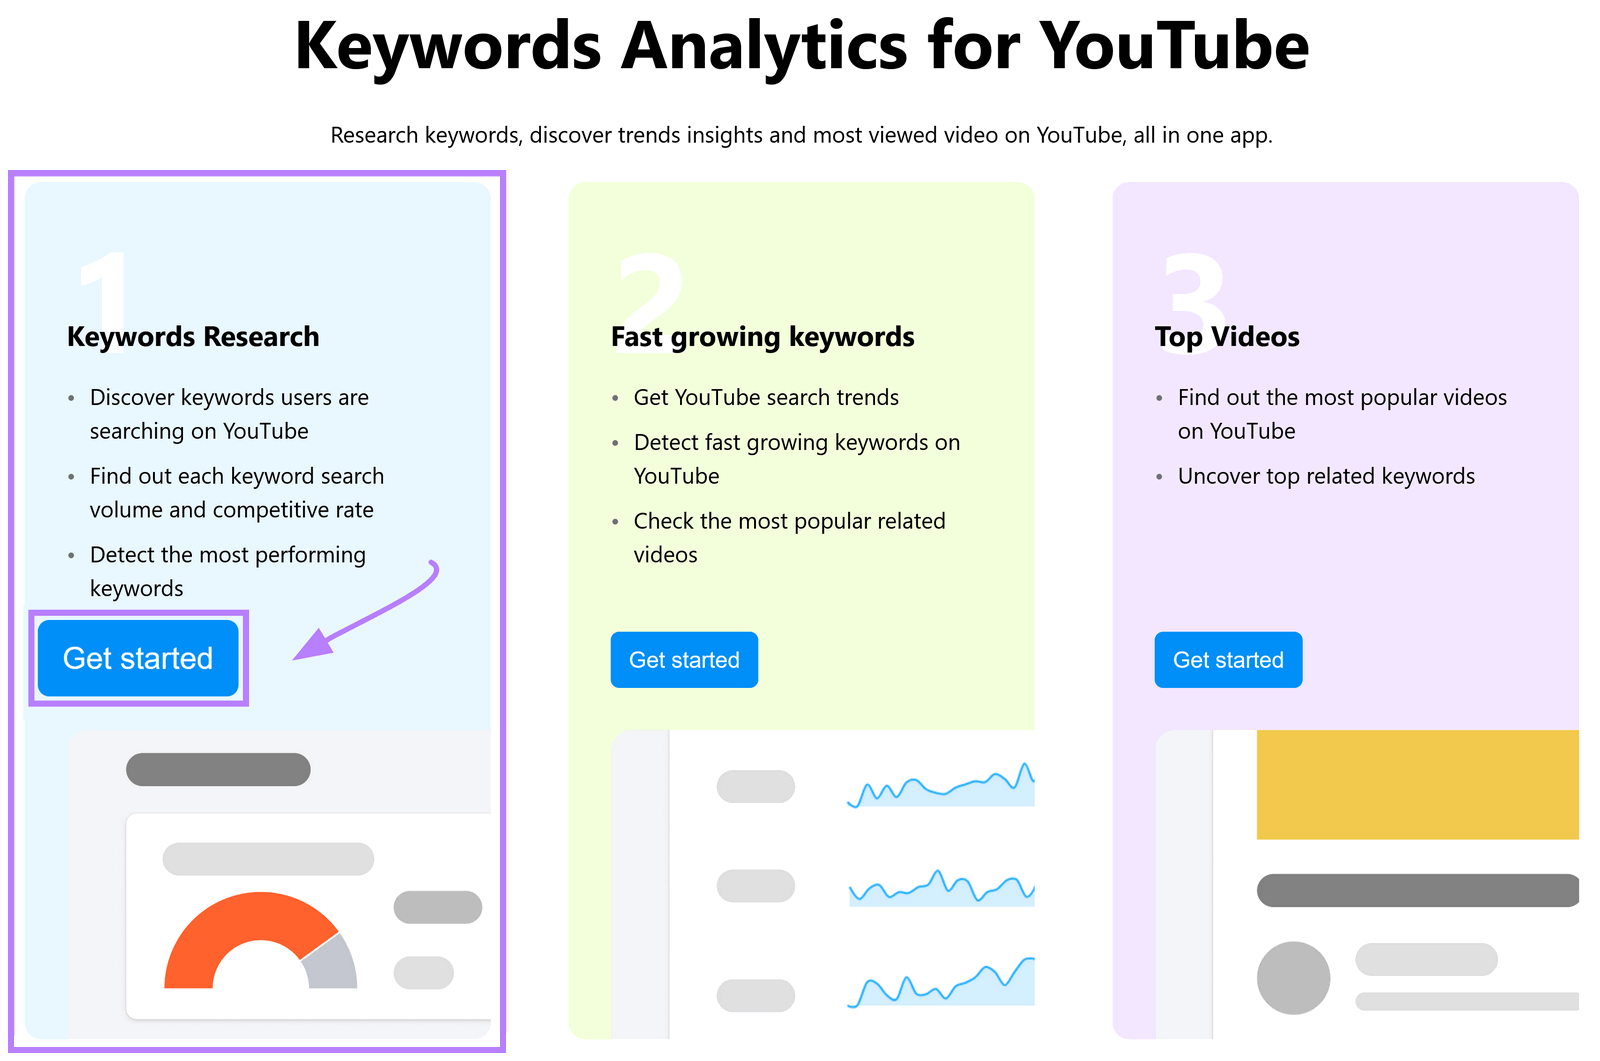 Get started with "Keyword Research" successful  Keyword Analytics for YouTube tool